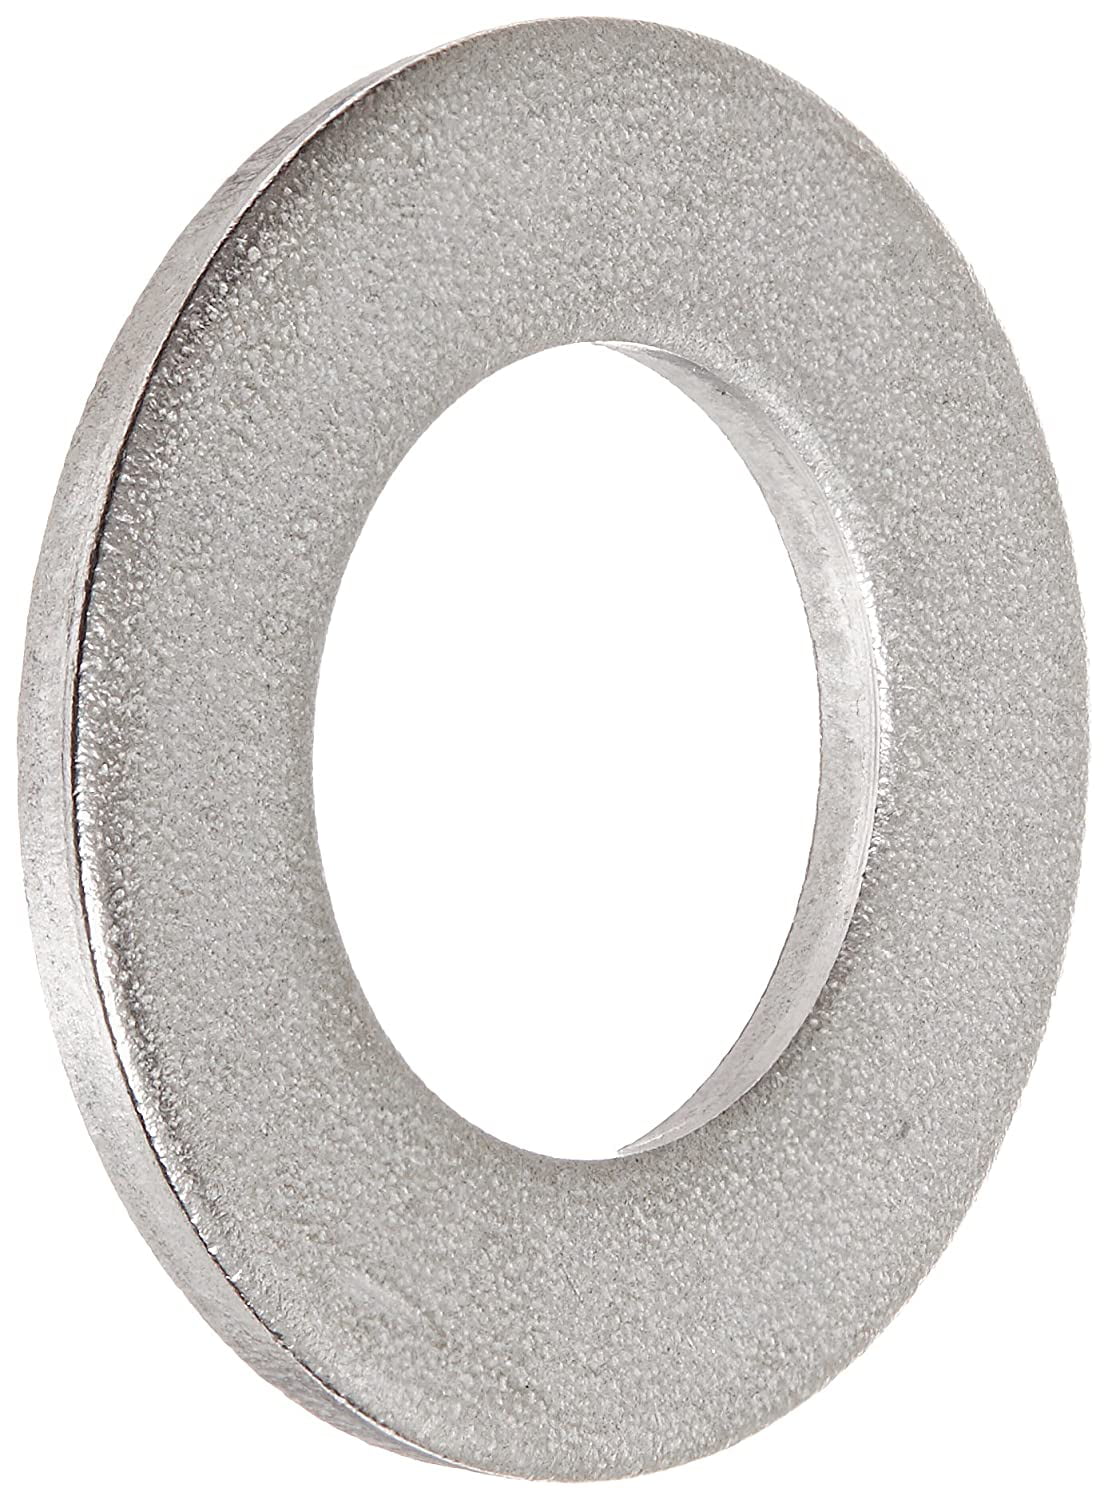 Pan Head Fully Threaded 7/16 Length Internal-Tooth Lock Washer Phillips Drive Pack of 100 Zinc Plated Finish #6-32 UNC Threads Steel Machine Screw Meets ASME B18.13 